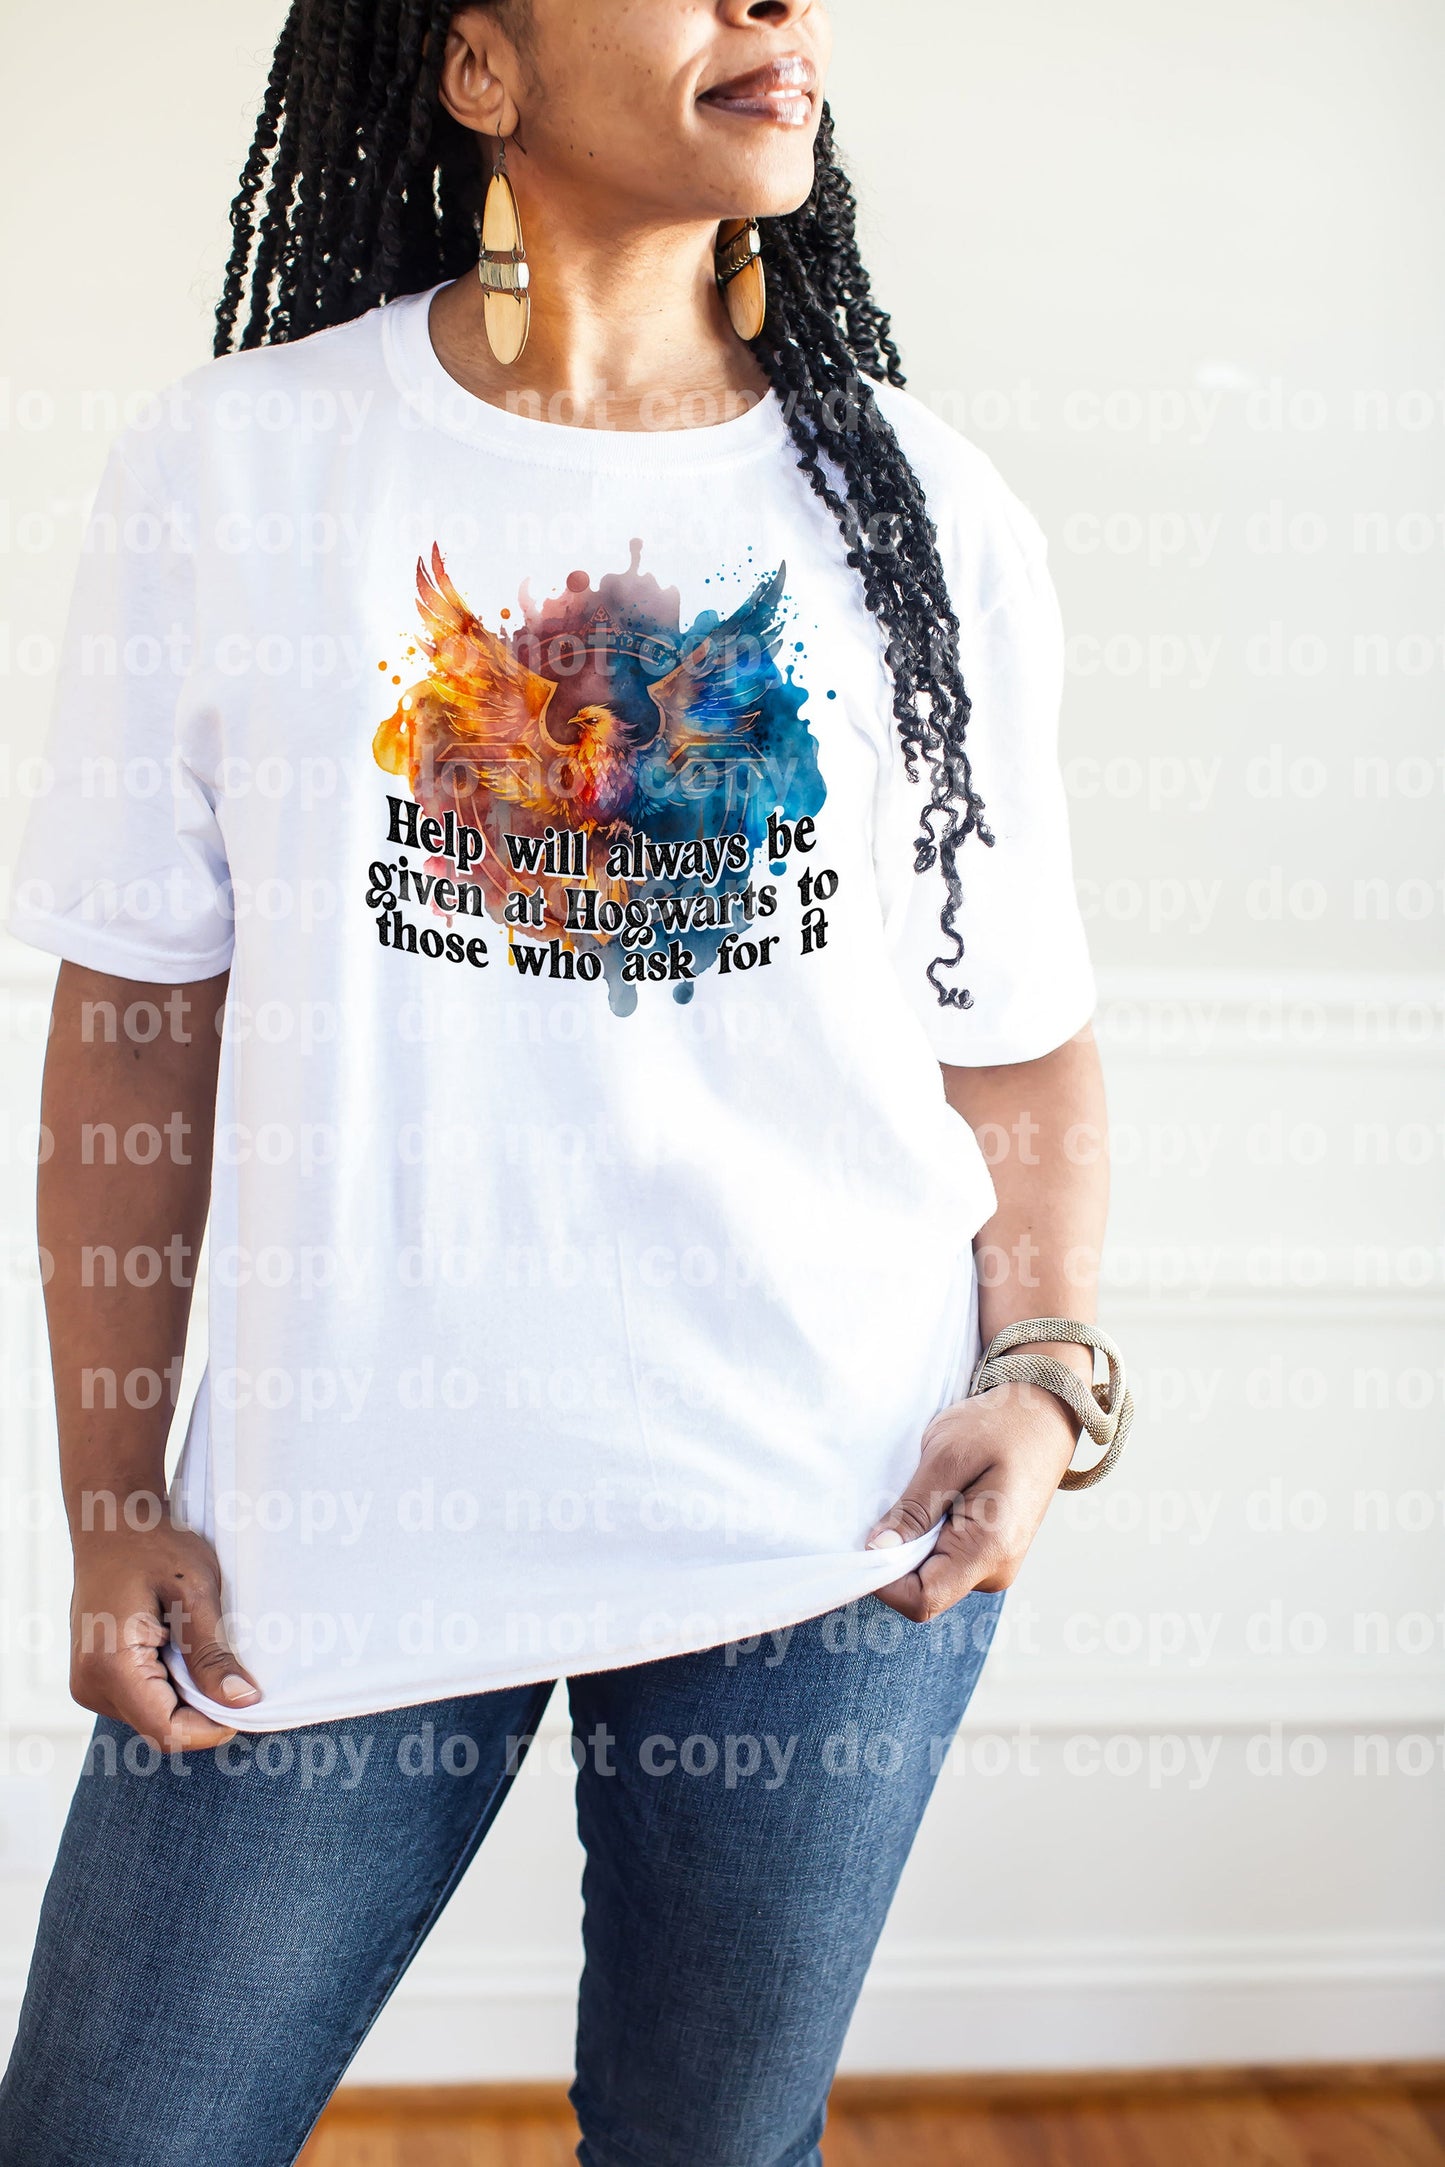 Help Will Always Be Given Dream Print or Sublimation Print